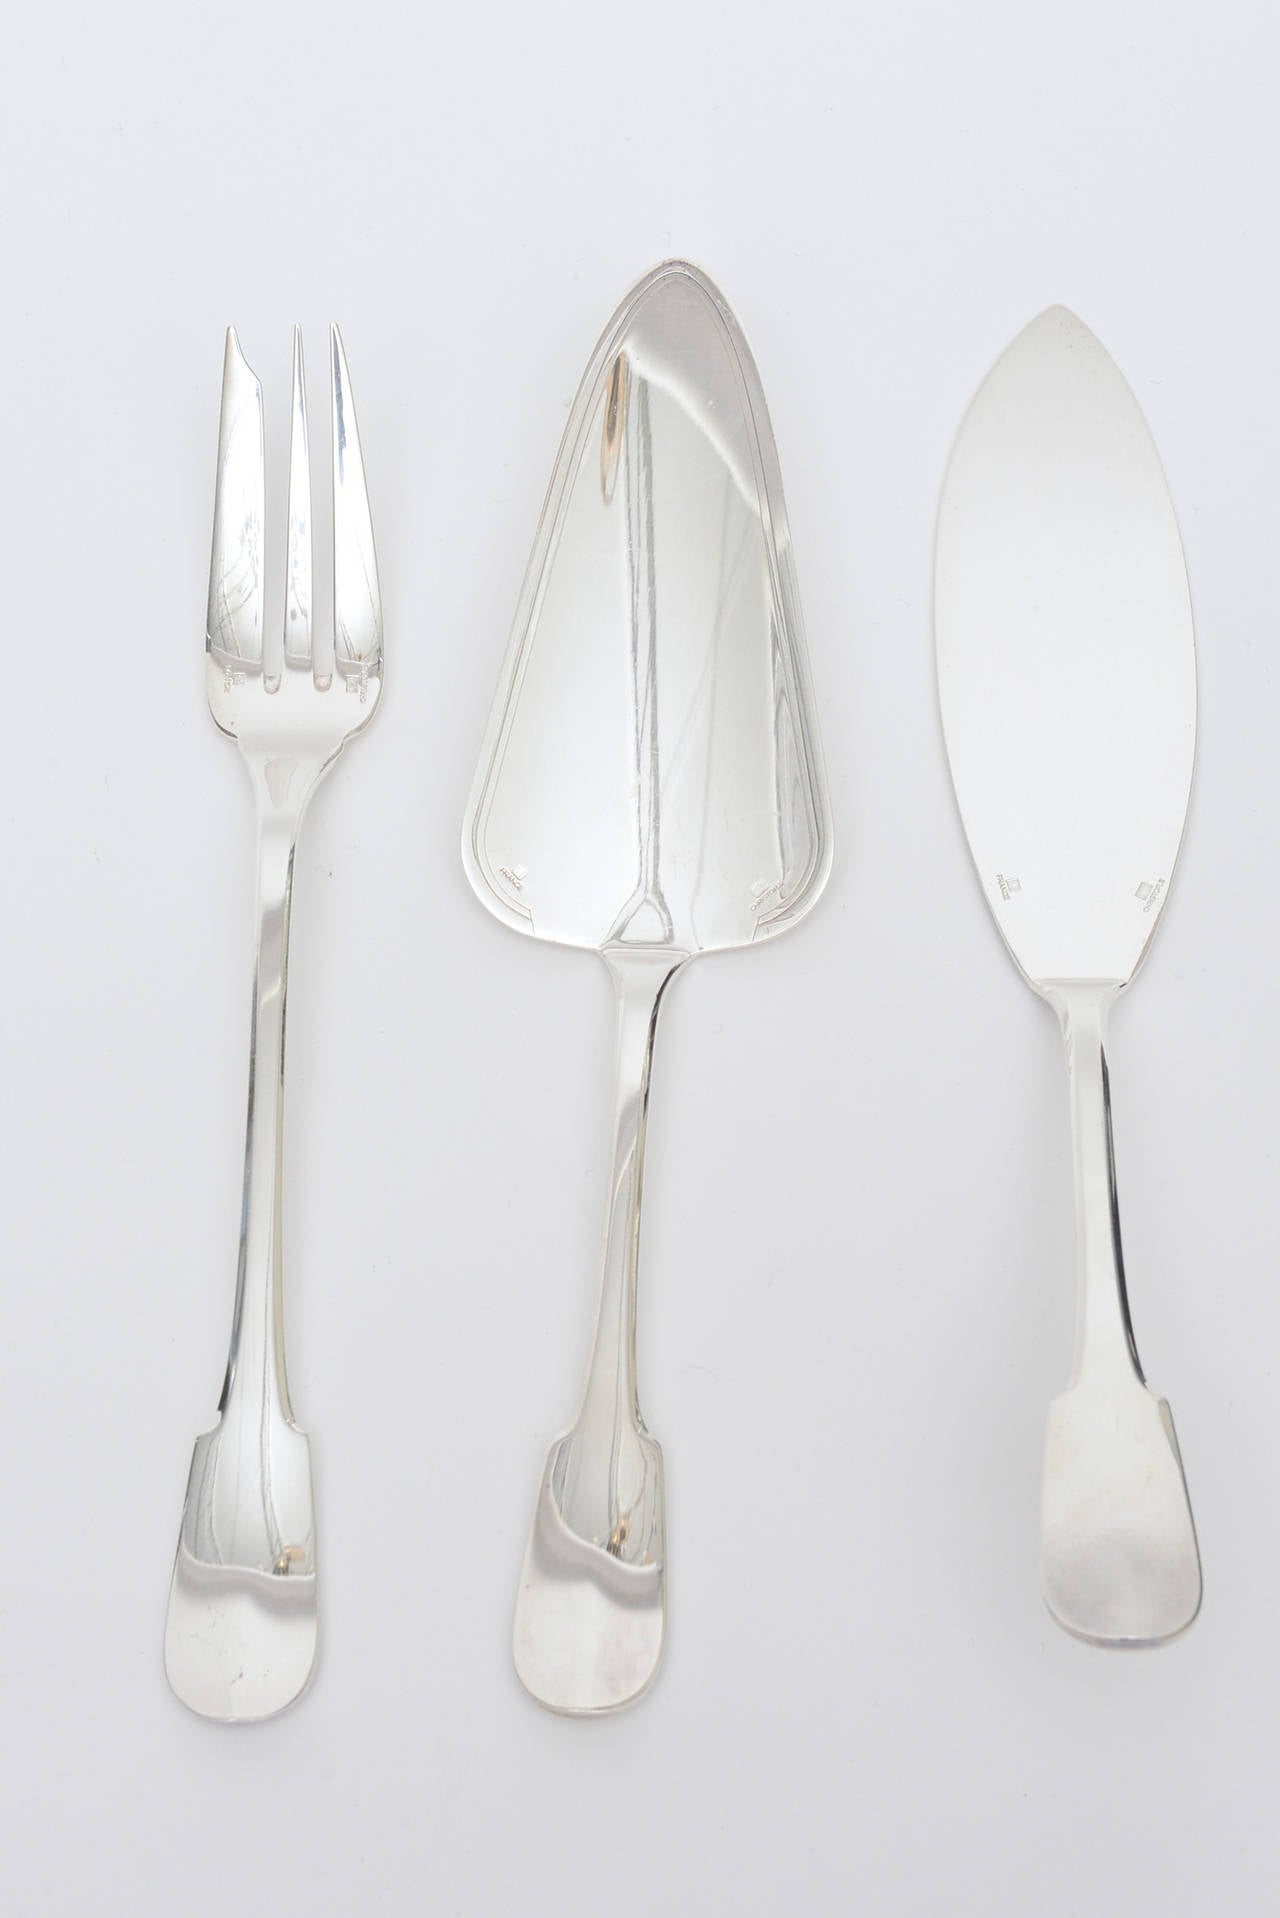 This set of ten wonderful vintage silver plate serving pieces from Christofle are the 